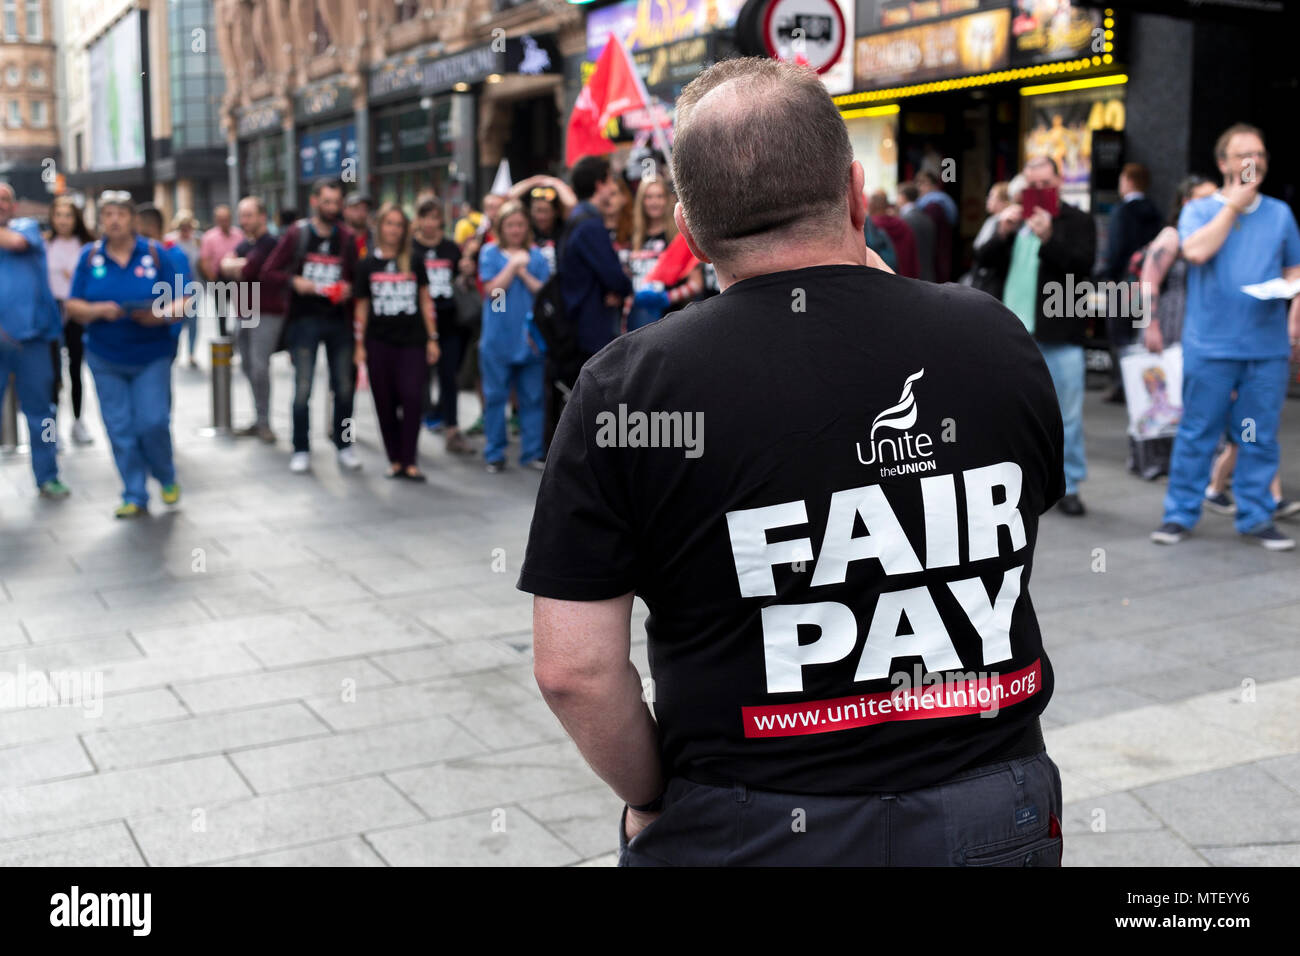 Unite campaigners for fair pay for TGI Friday workers, Leicester Square London, May 2018 Stock Photo